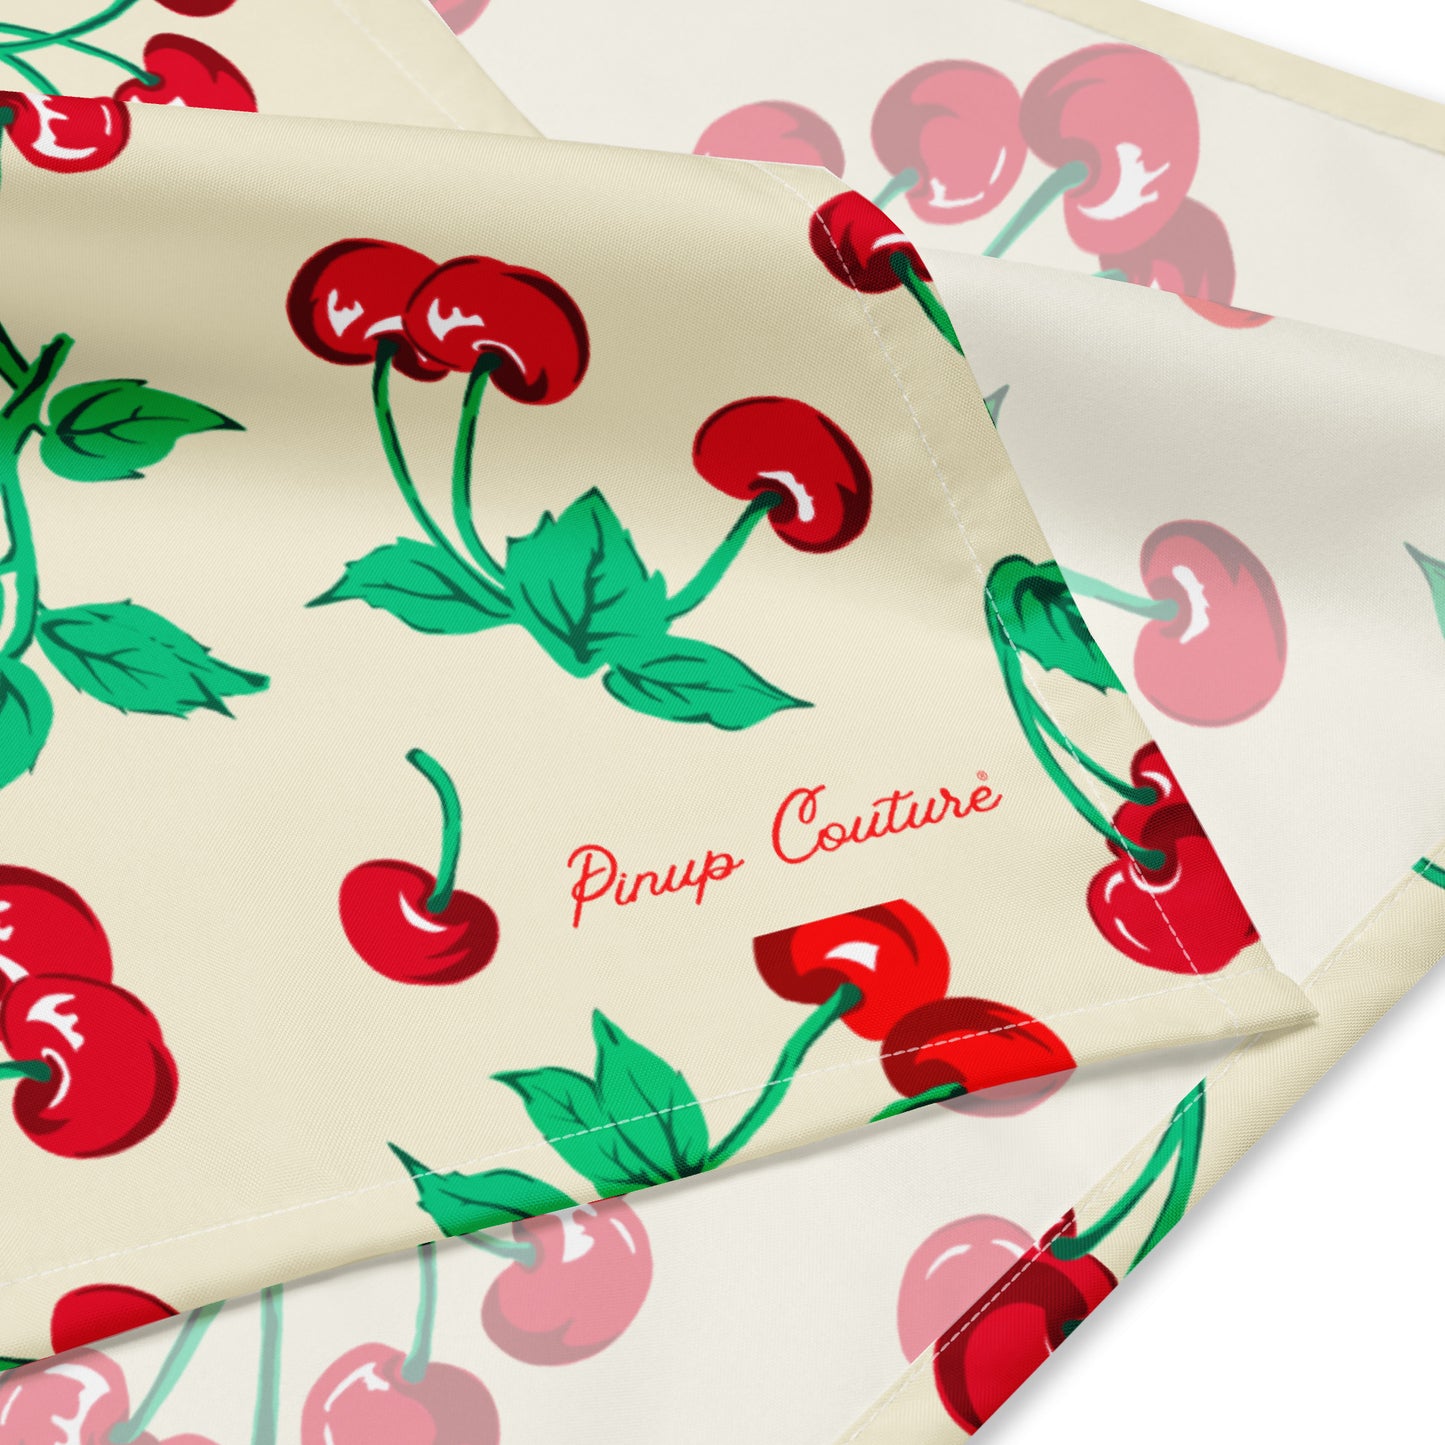 Cyndi Antique Ivory Cherry Girl Bandana Scarf | Pinup Couture Relaxed